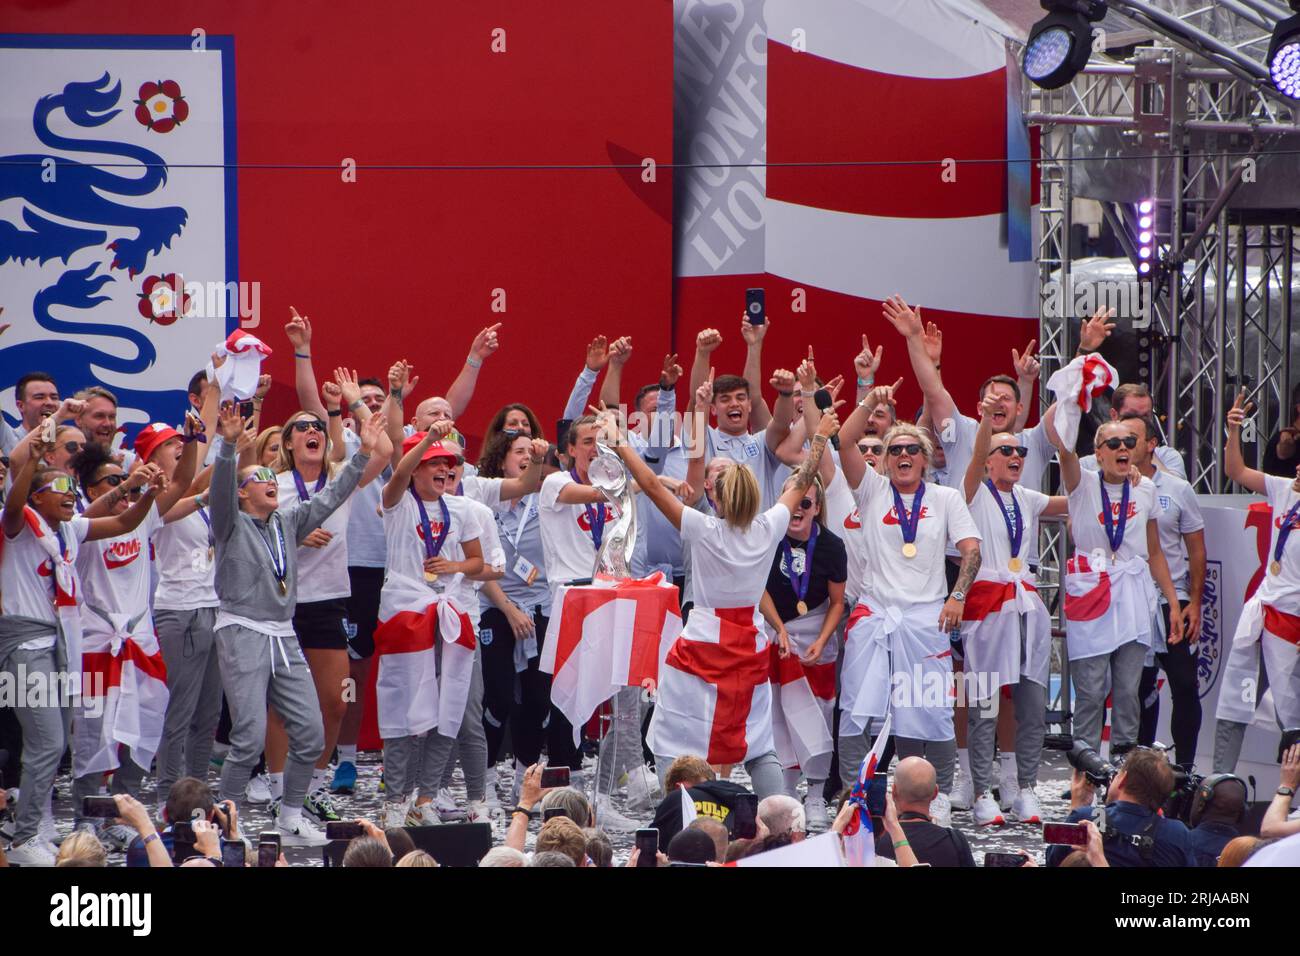 London, UK. 1st August 2022. The Lionesses celebrate on stage. Thousands of people gathered in Trafalgar Square to celebrate the England team - the Lionesses -  winning Women's Euro 2022 football tournament. Stock Photo